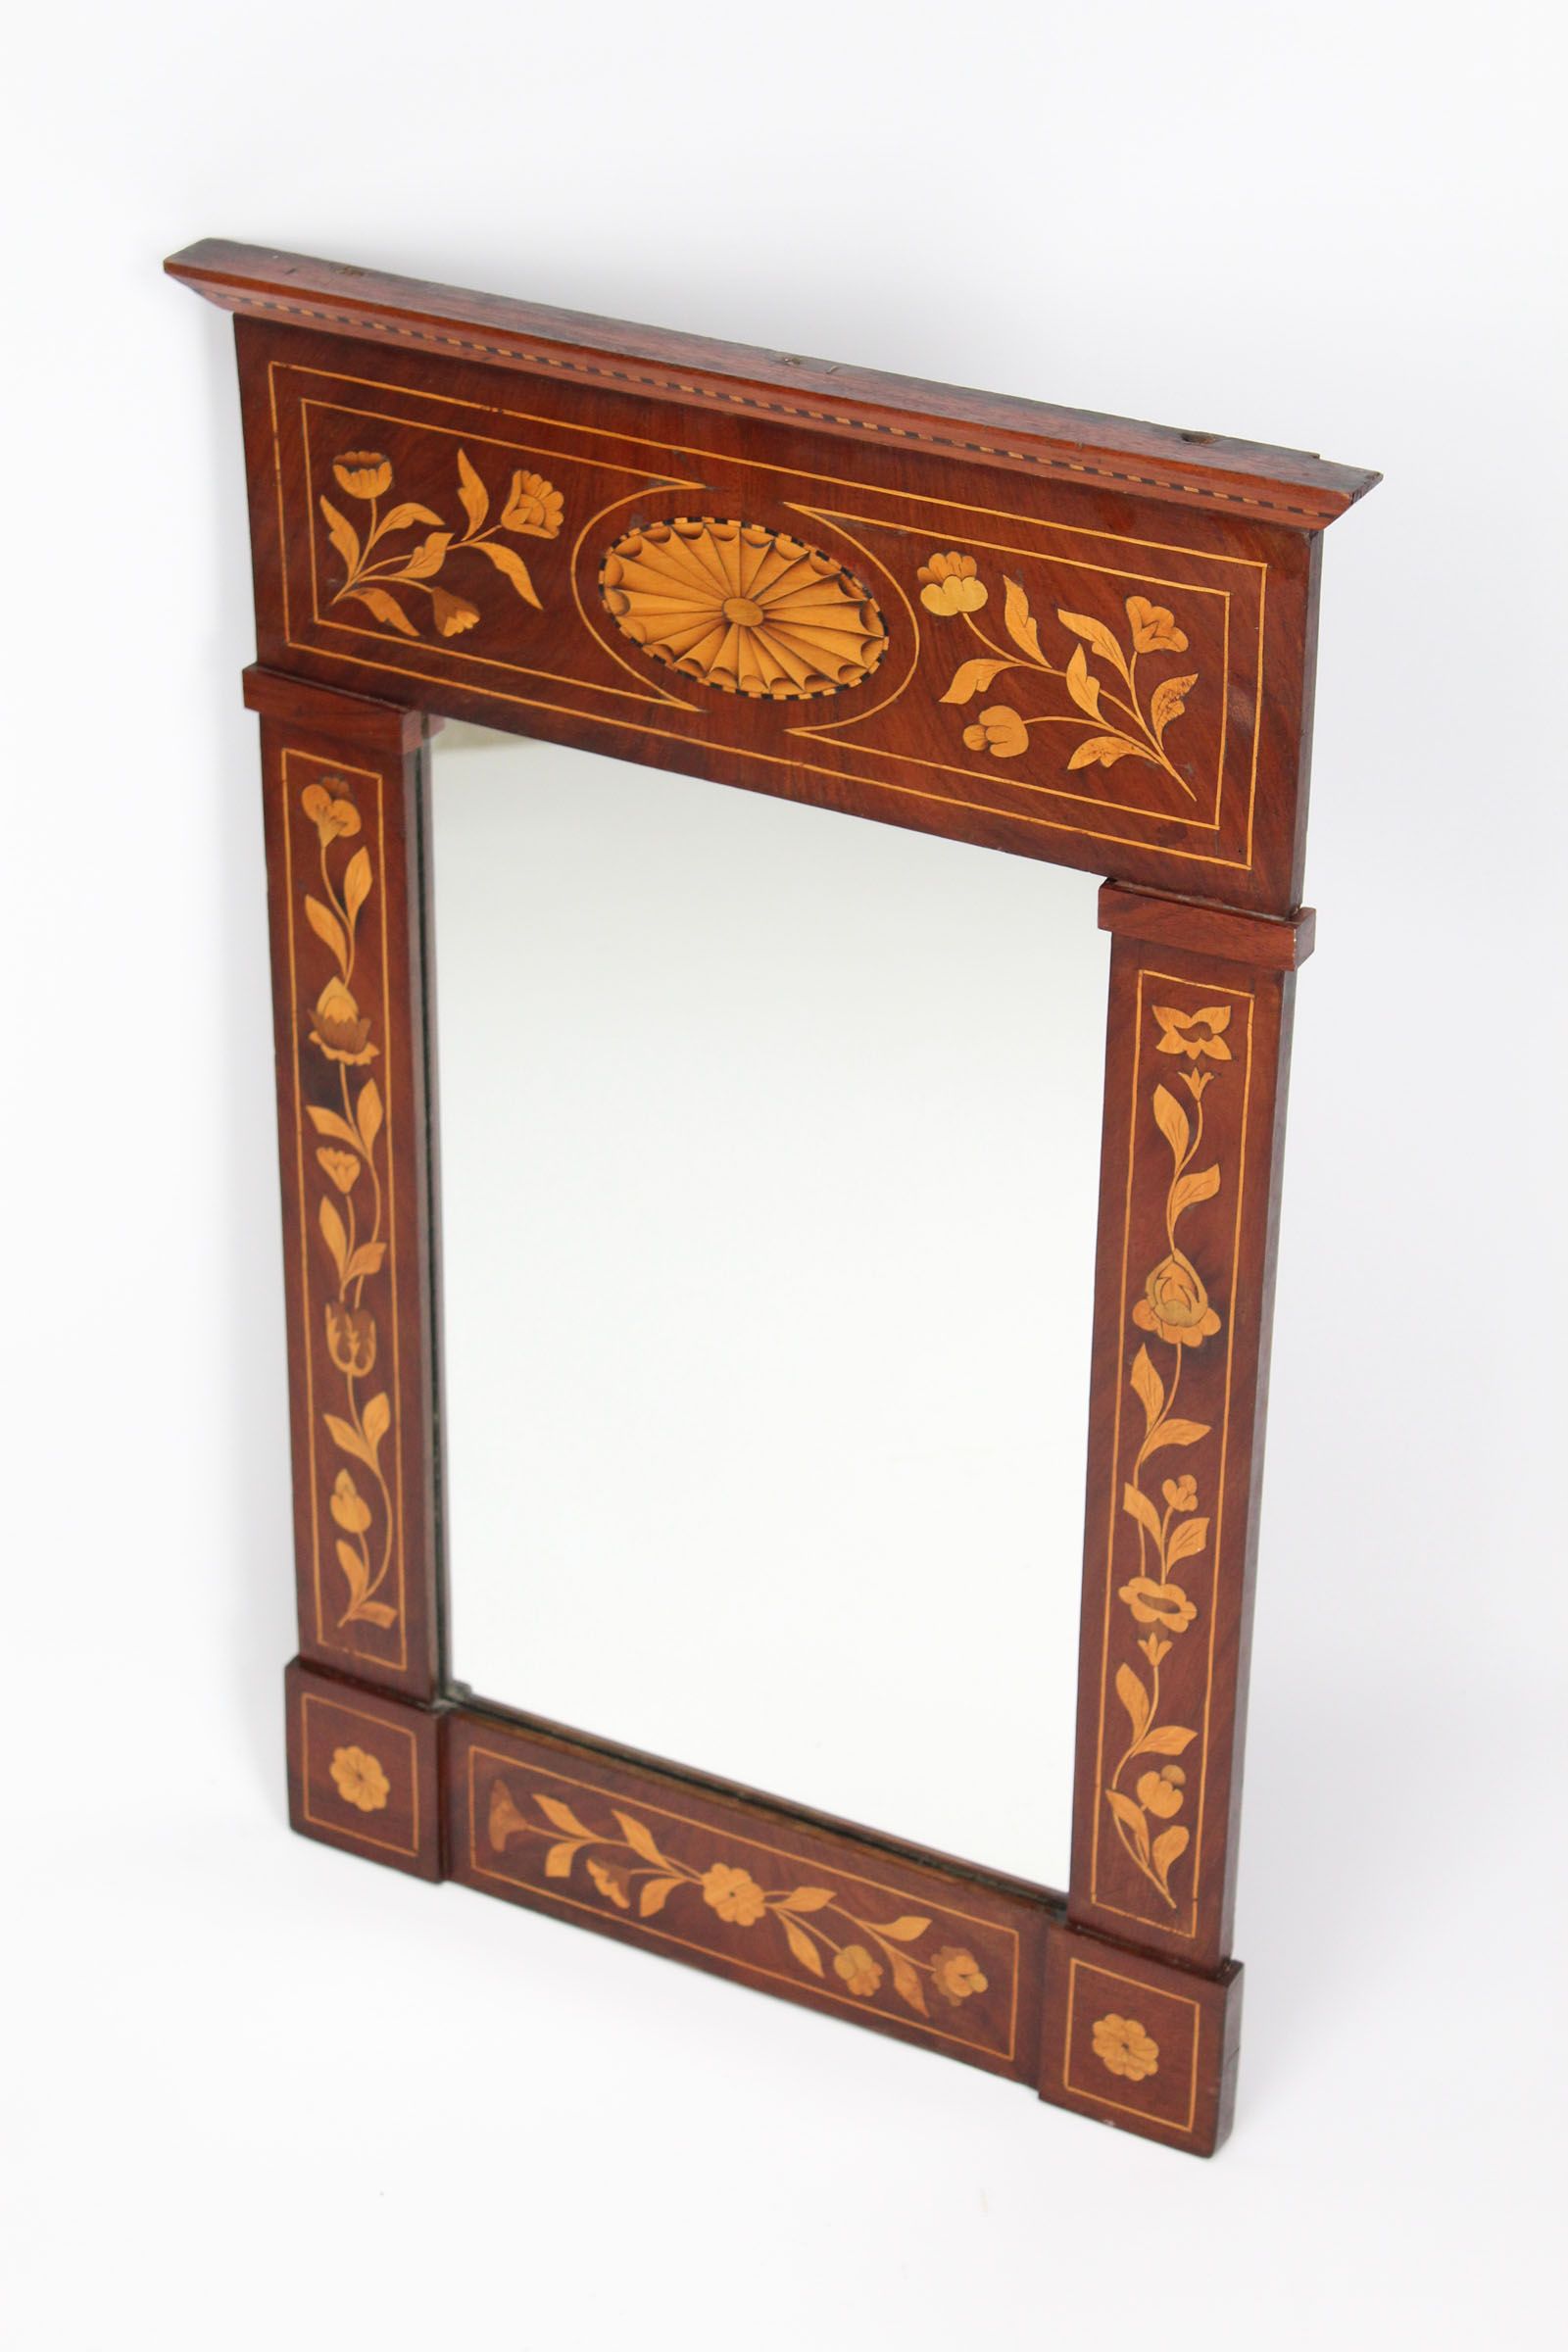 19th Century Dutch Inlaid Mahogany Mirror Intended For Mahogany Accent Wall Mirrors (View 2 of 15)